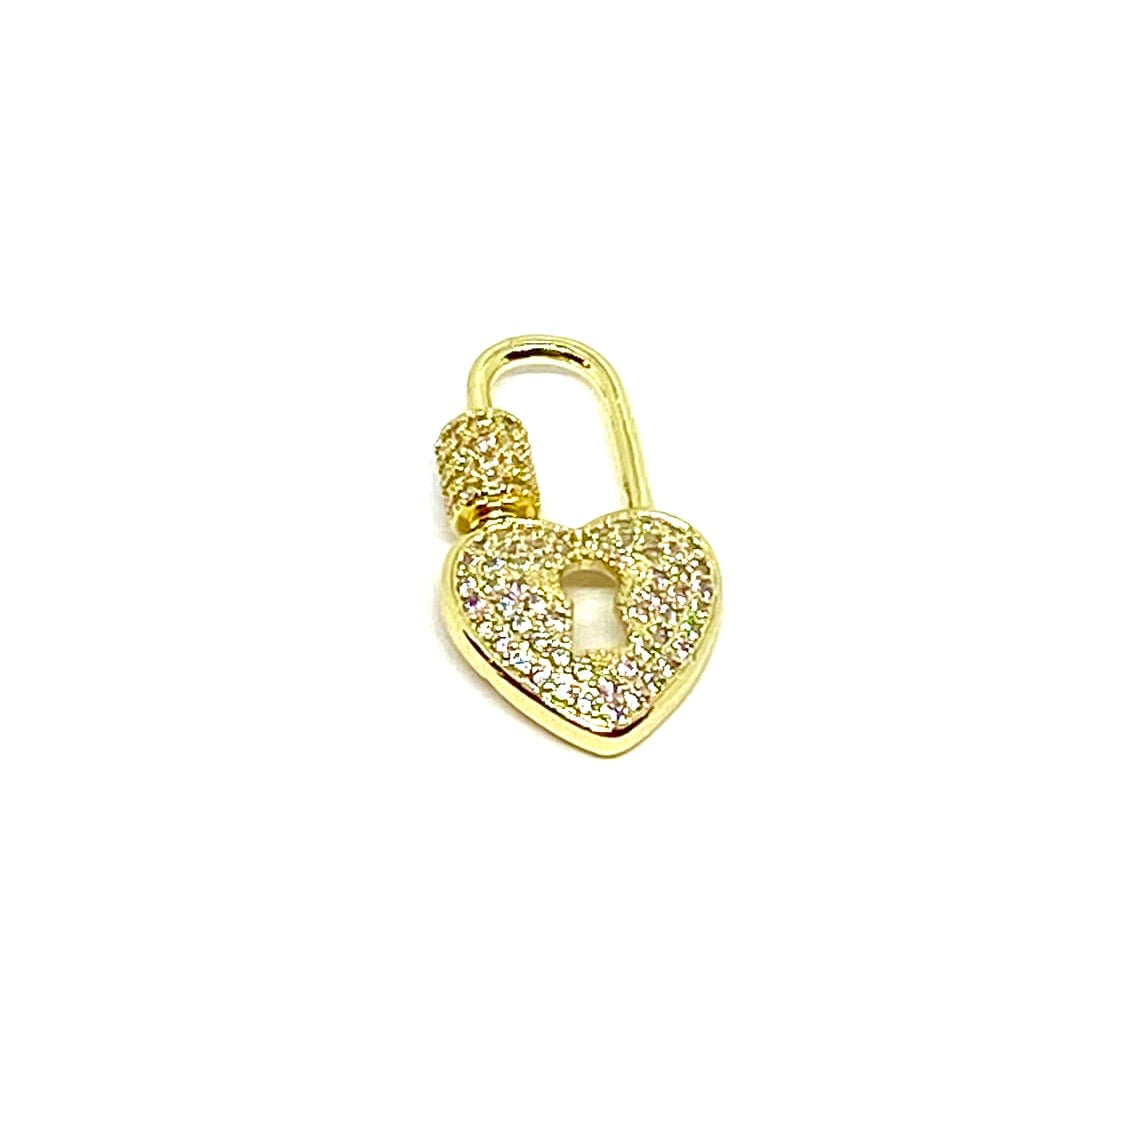 HEART LOCK PAVE necklace charm